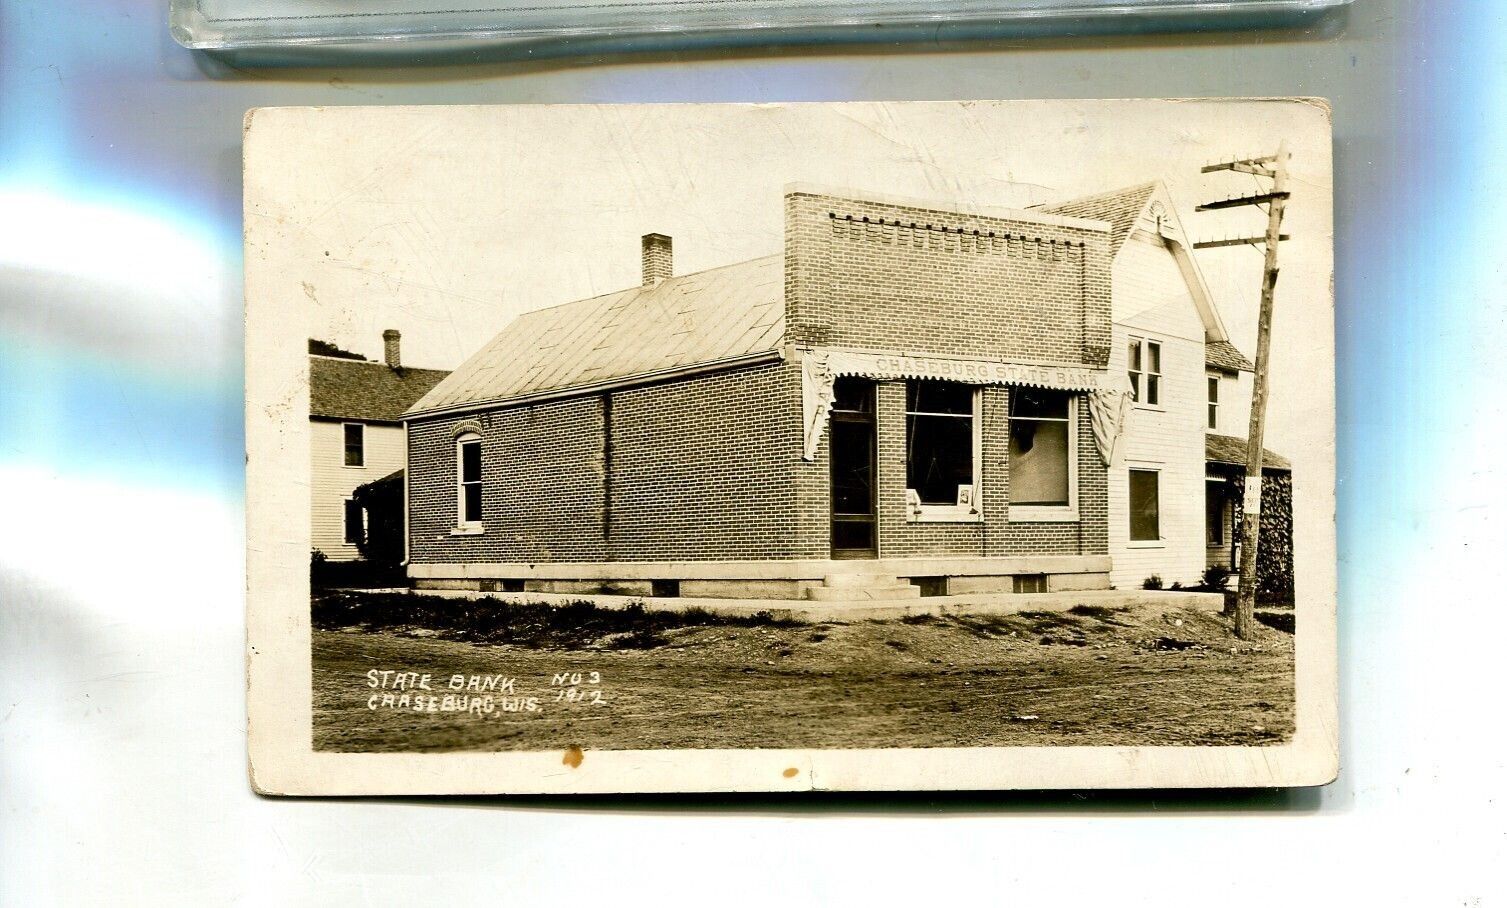 CHASEBURG WISCONSIN STATE BANK REAL PHOTO POSTCARD 5929R